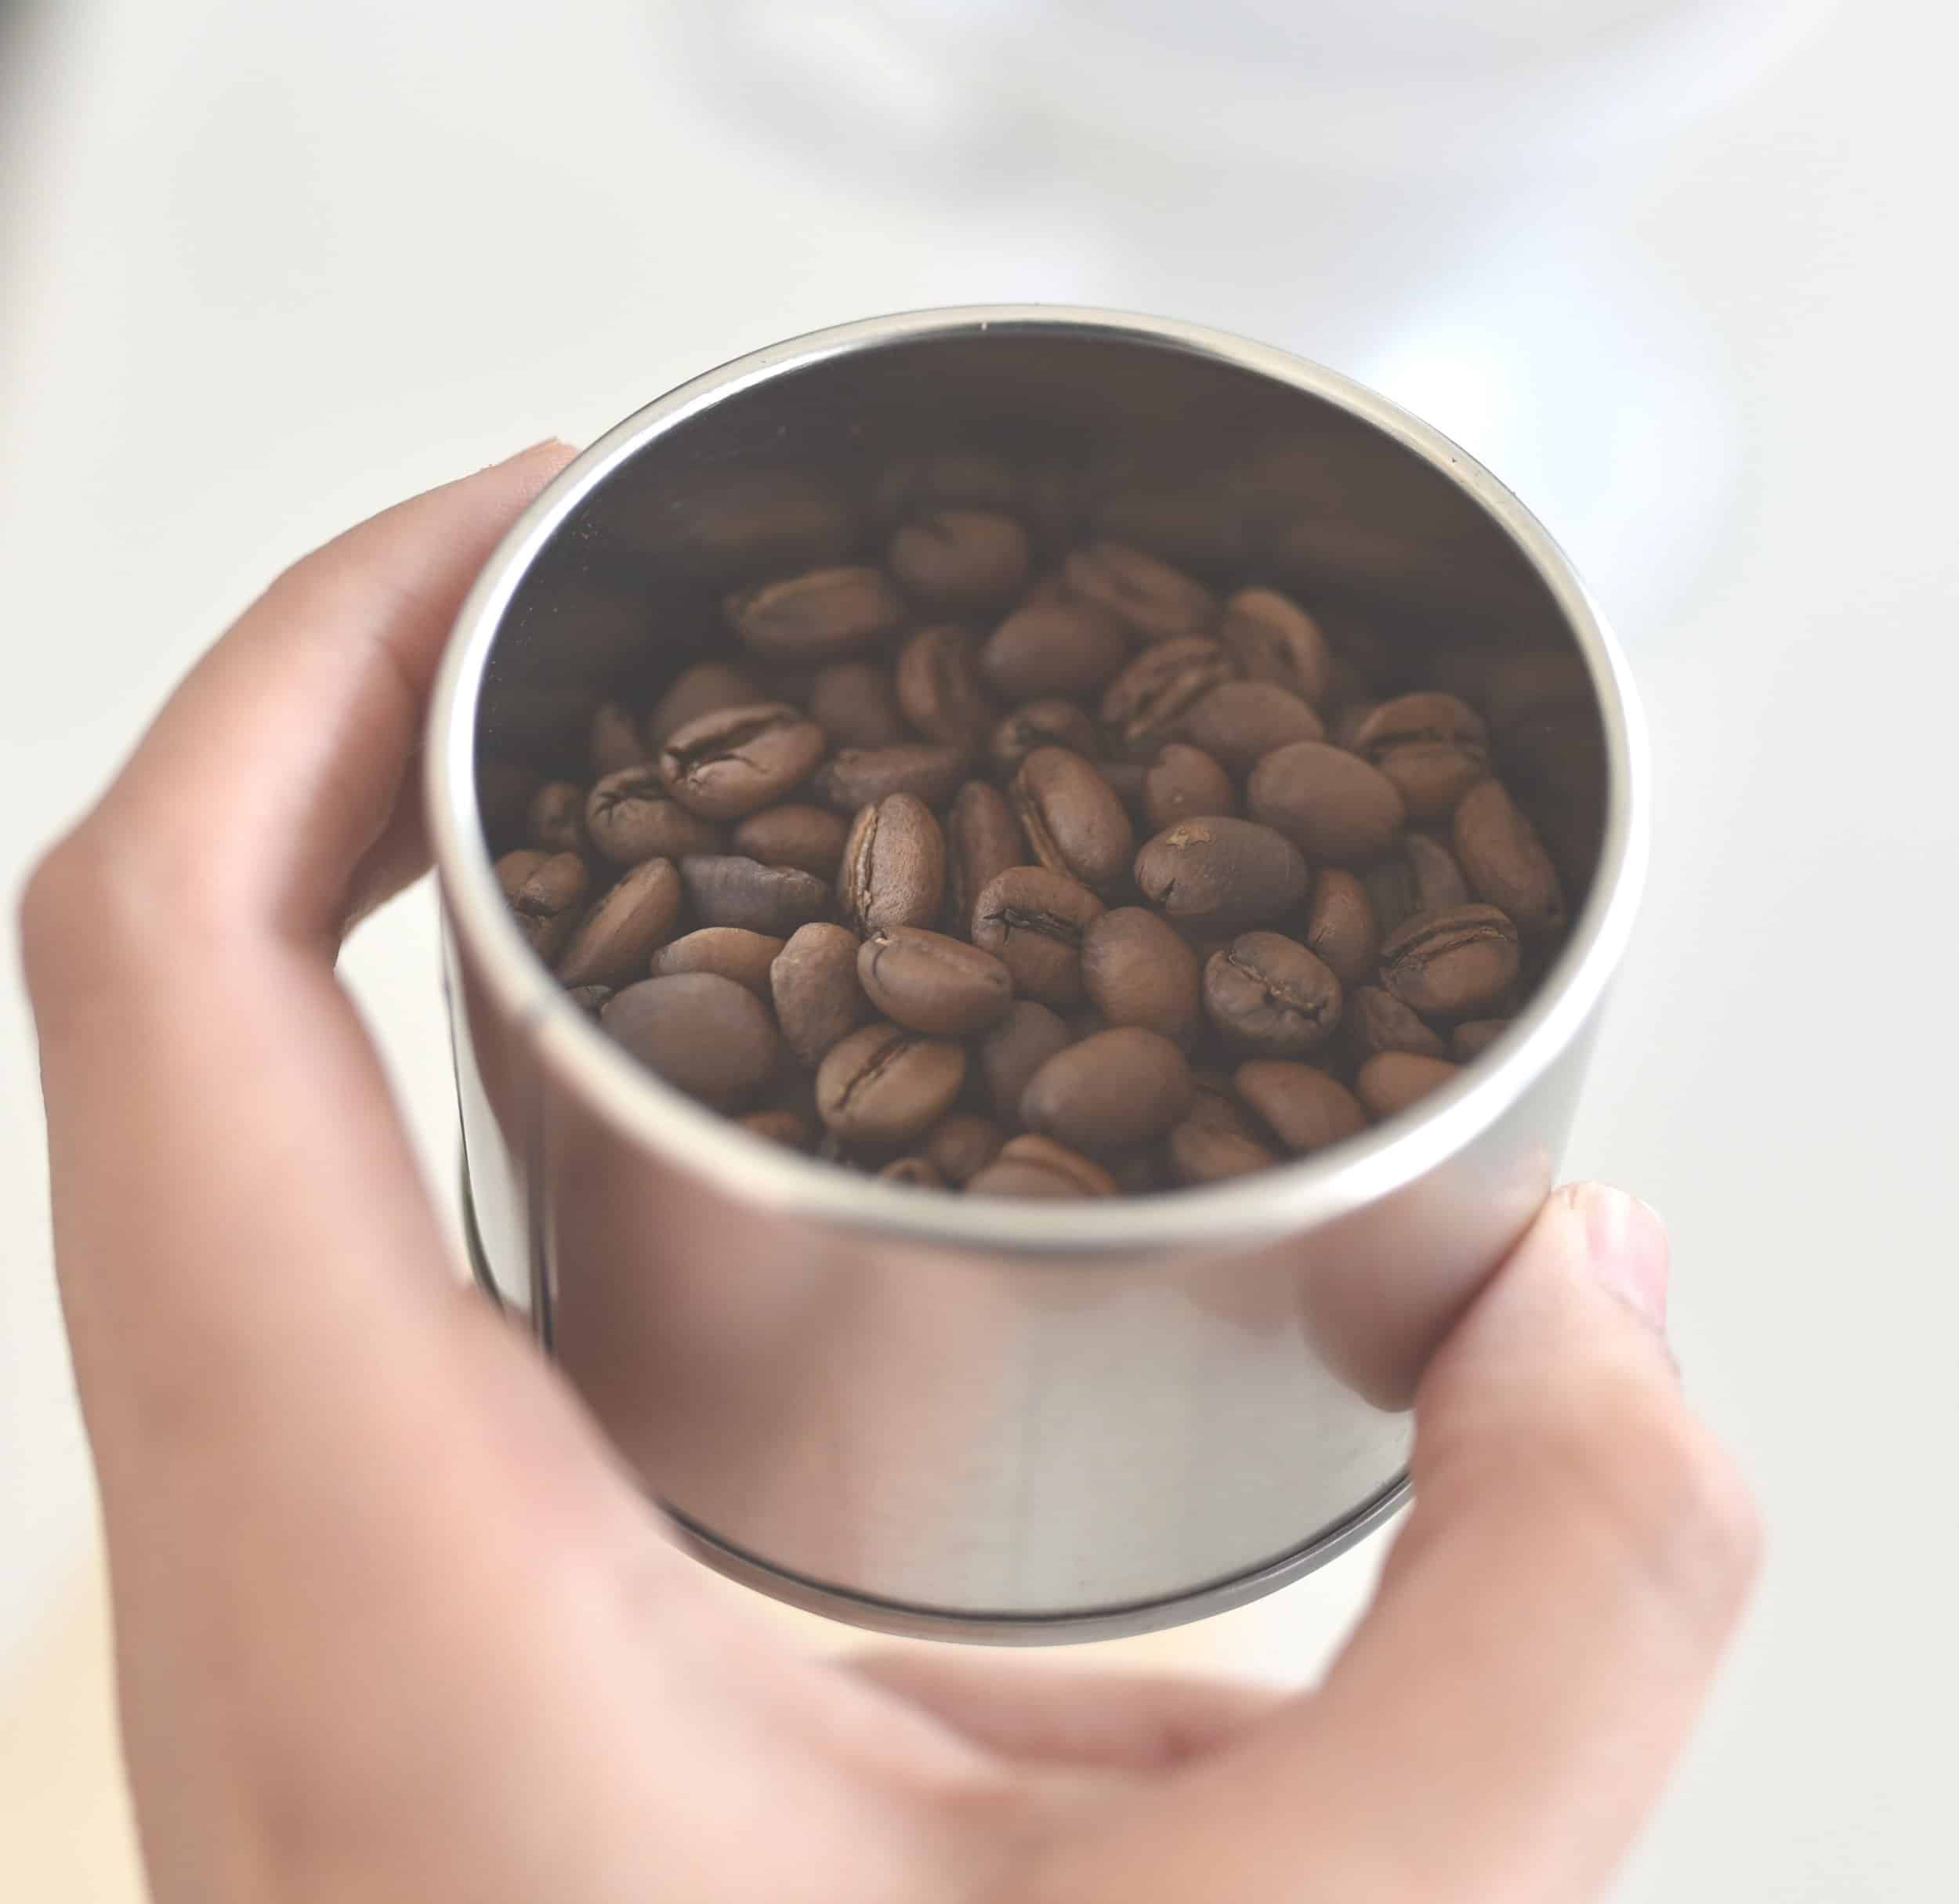 Fresh unground coffee beans in a steel cup